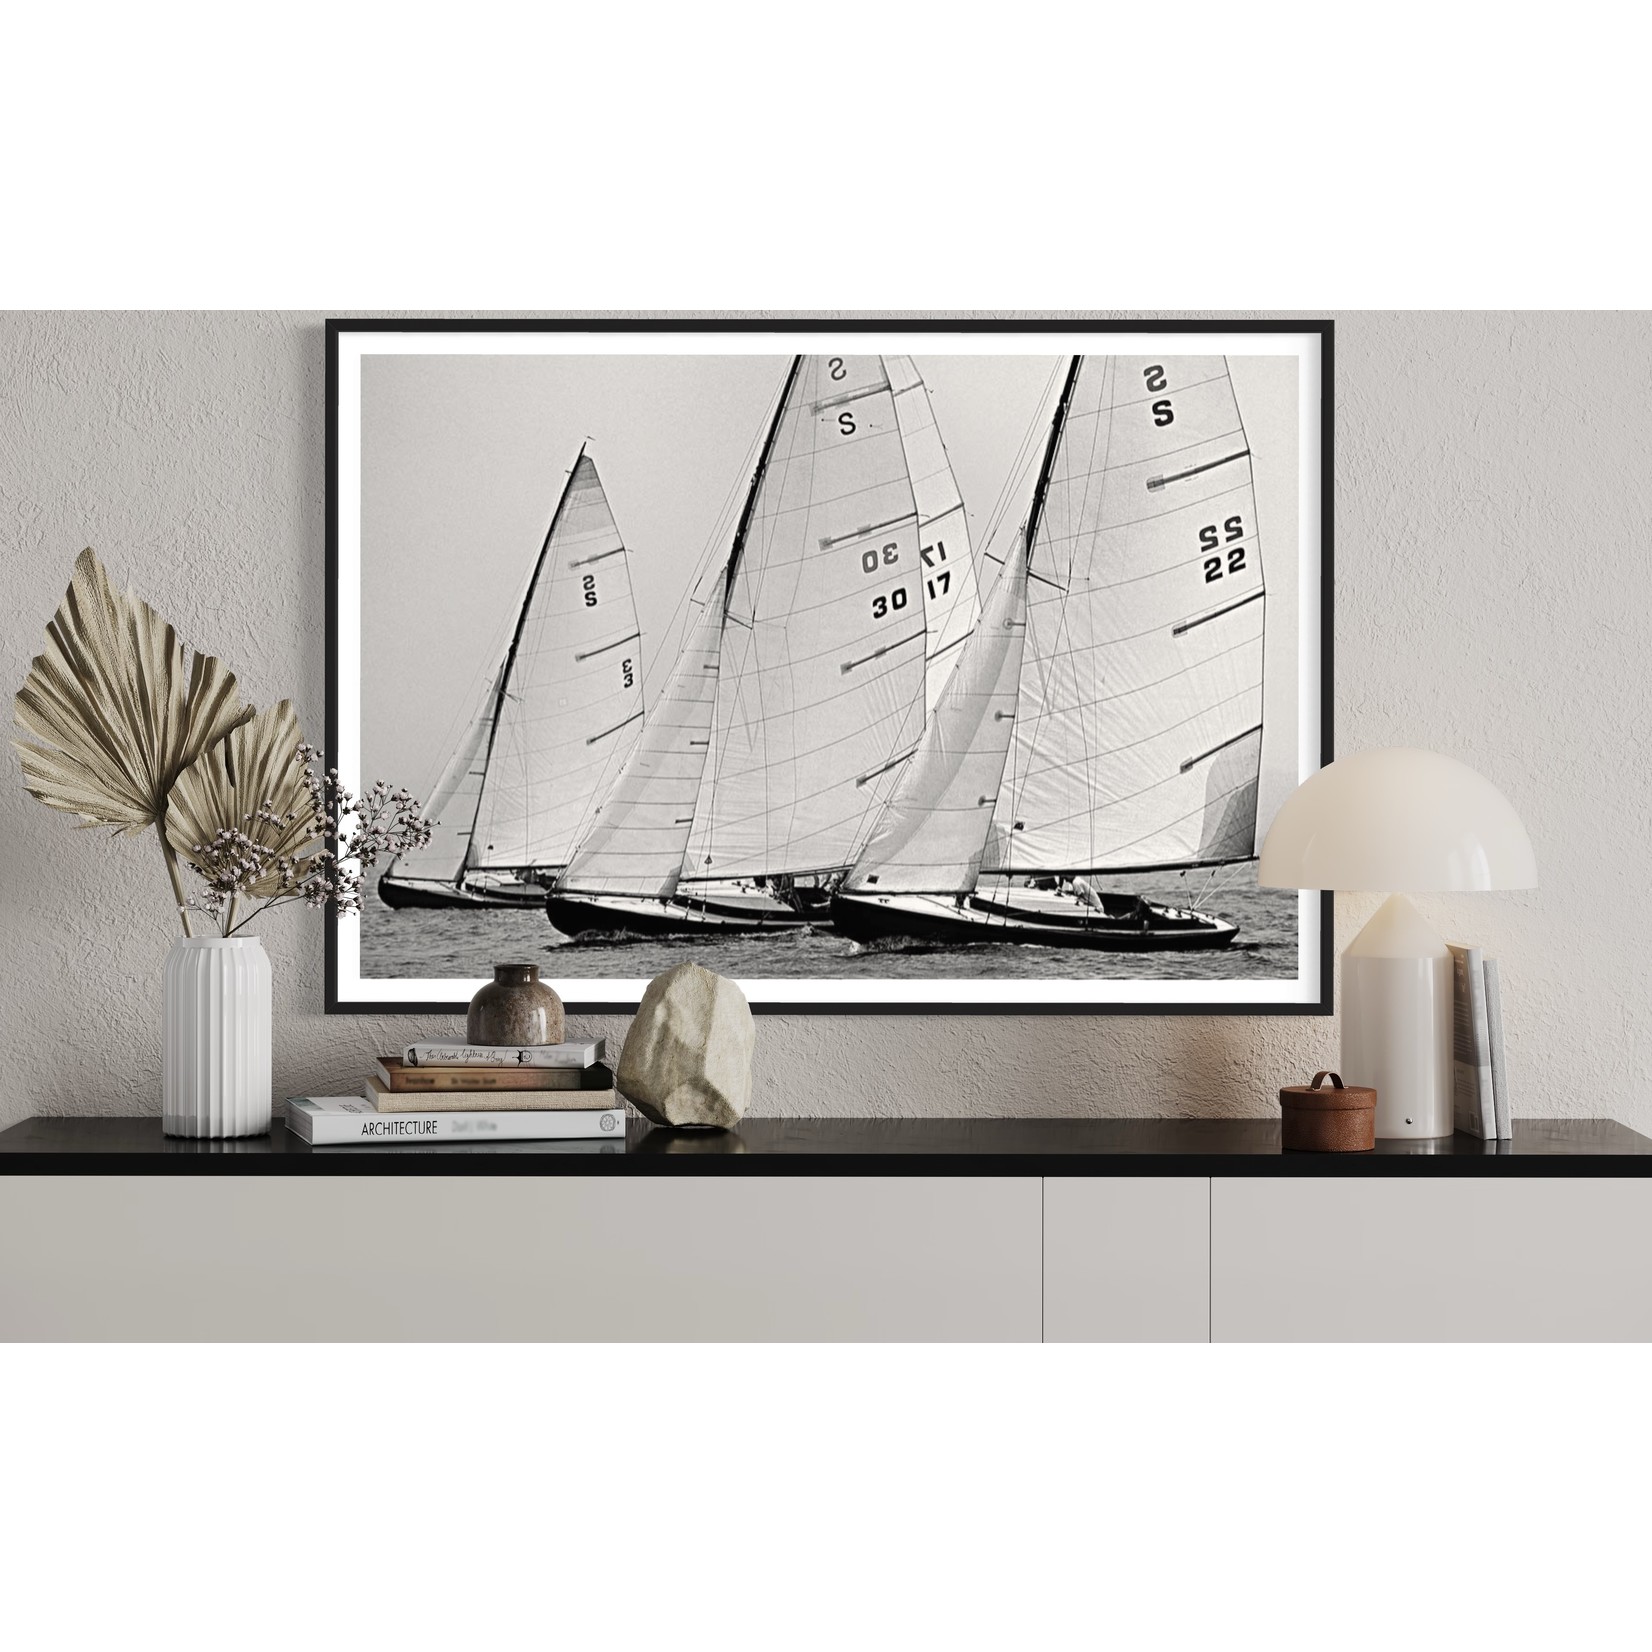 Fine Art Print on Rag Paper S- Boats in Line by Kevin Dailey